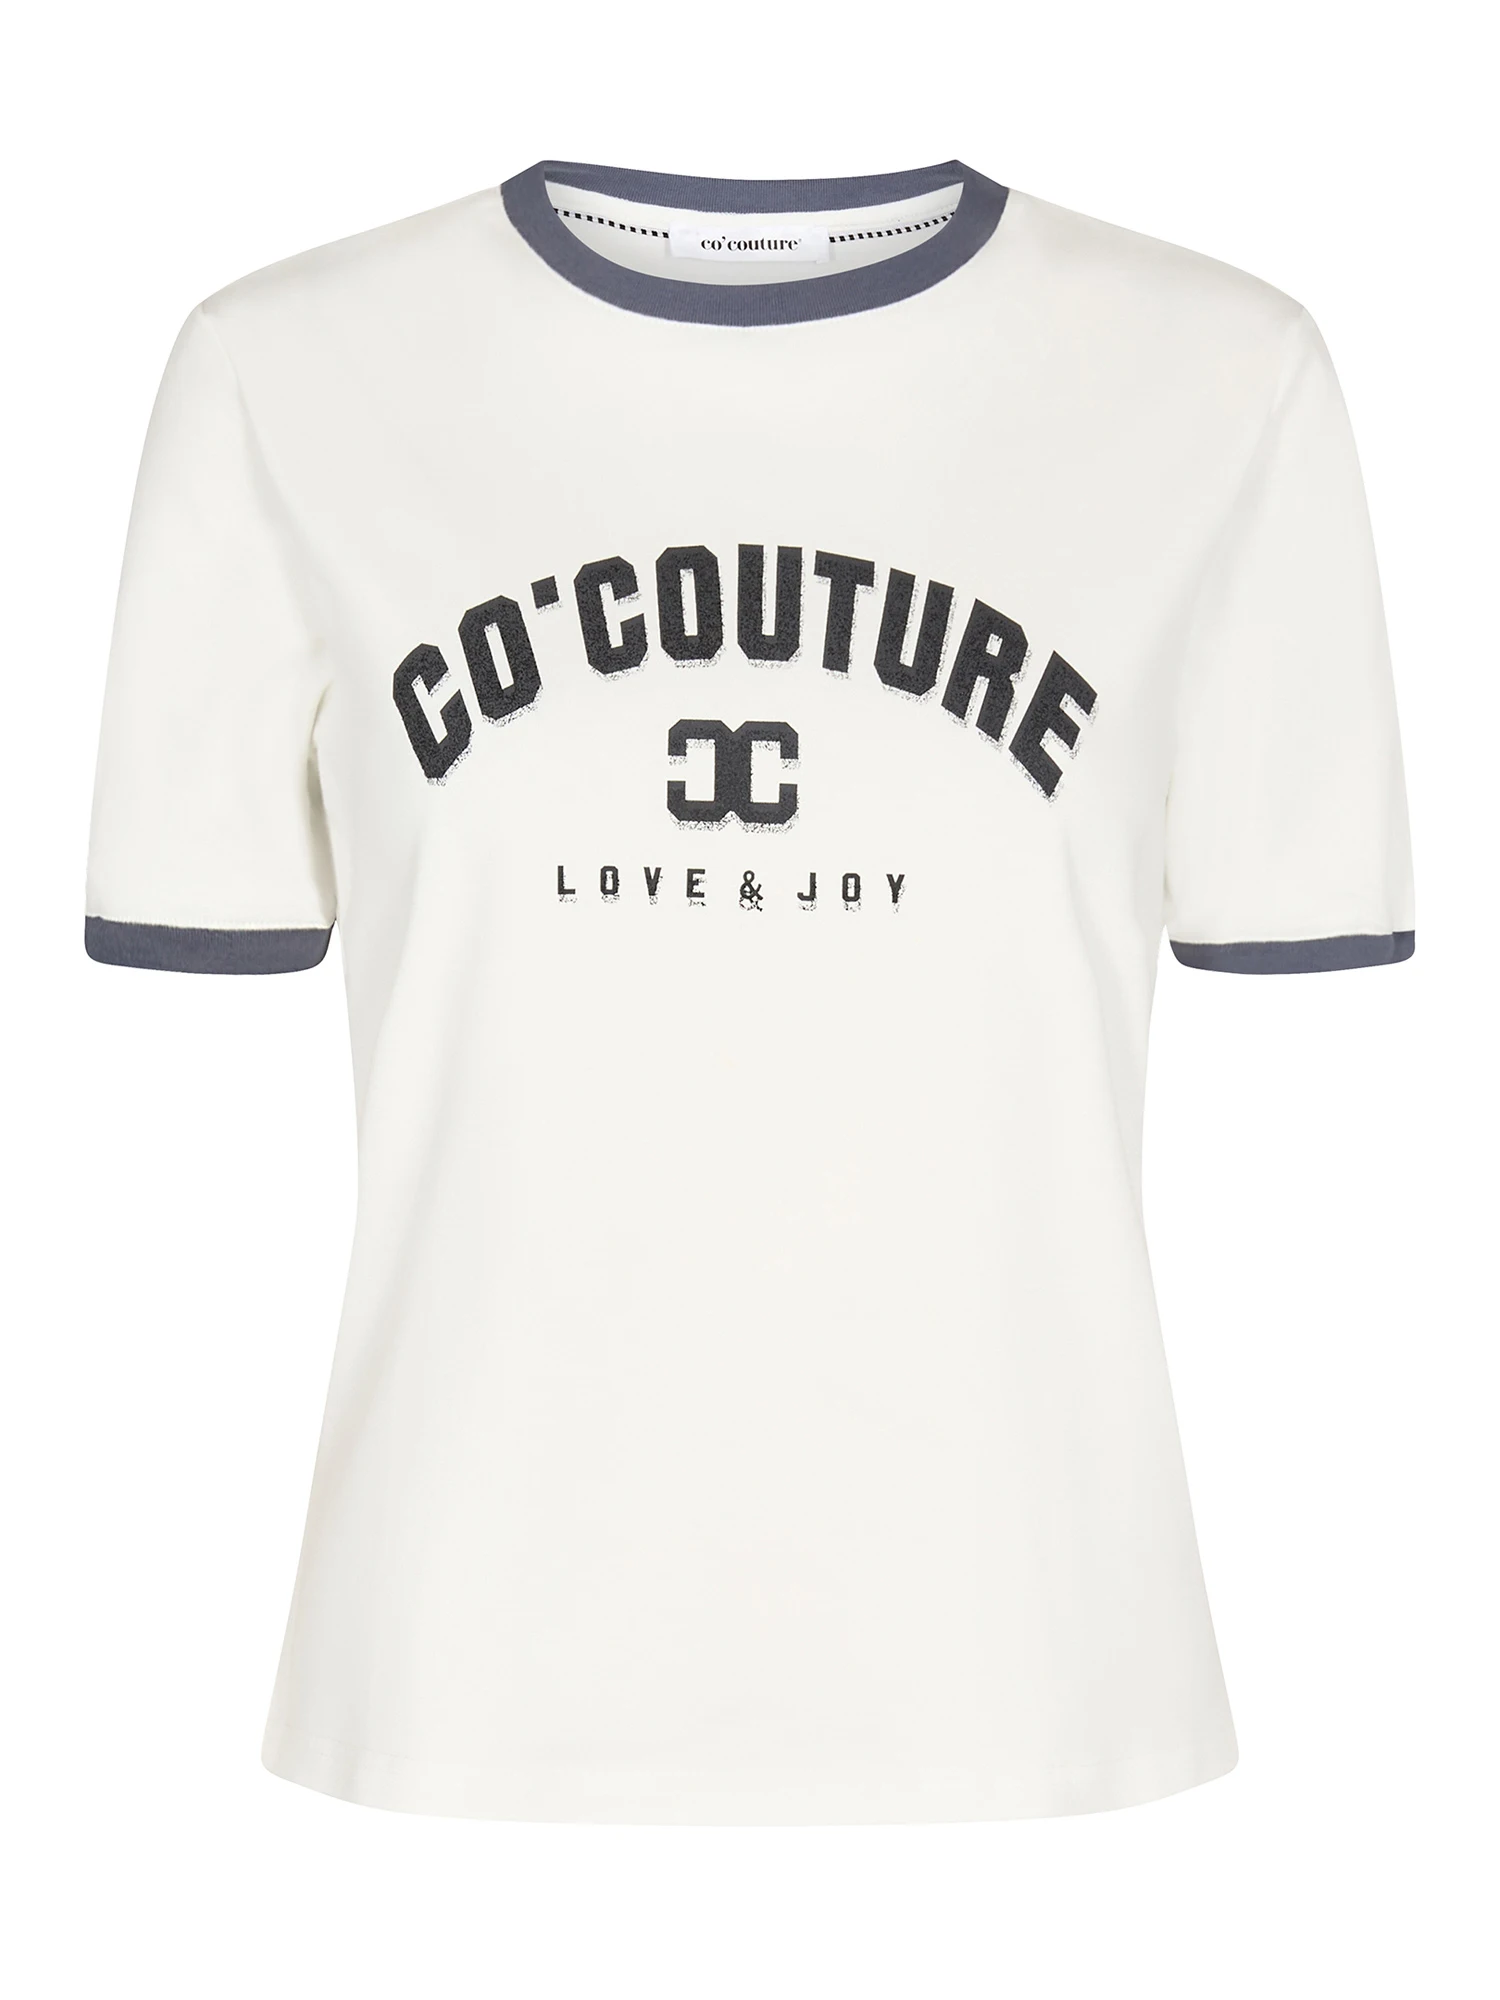 Cocouture EdgeCC T-shirt | Køb med print her